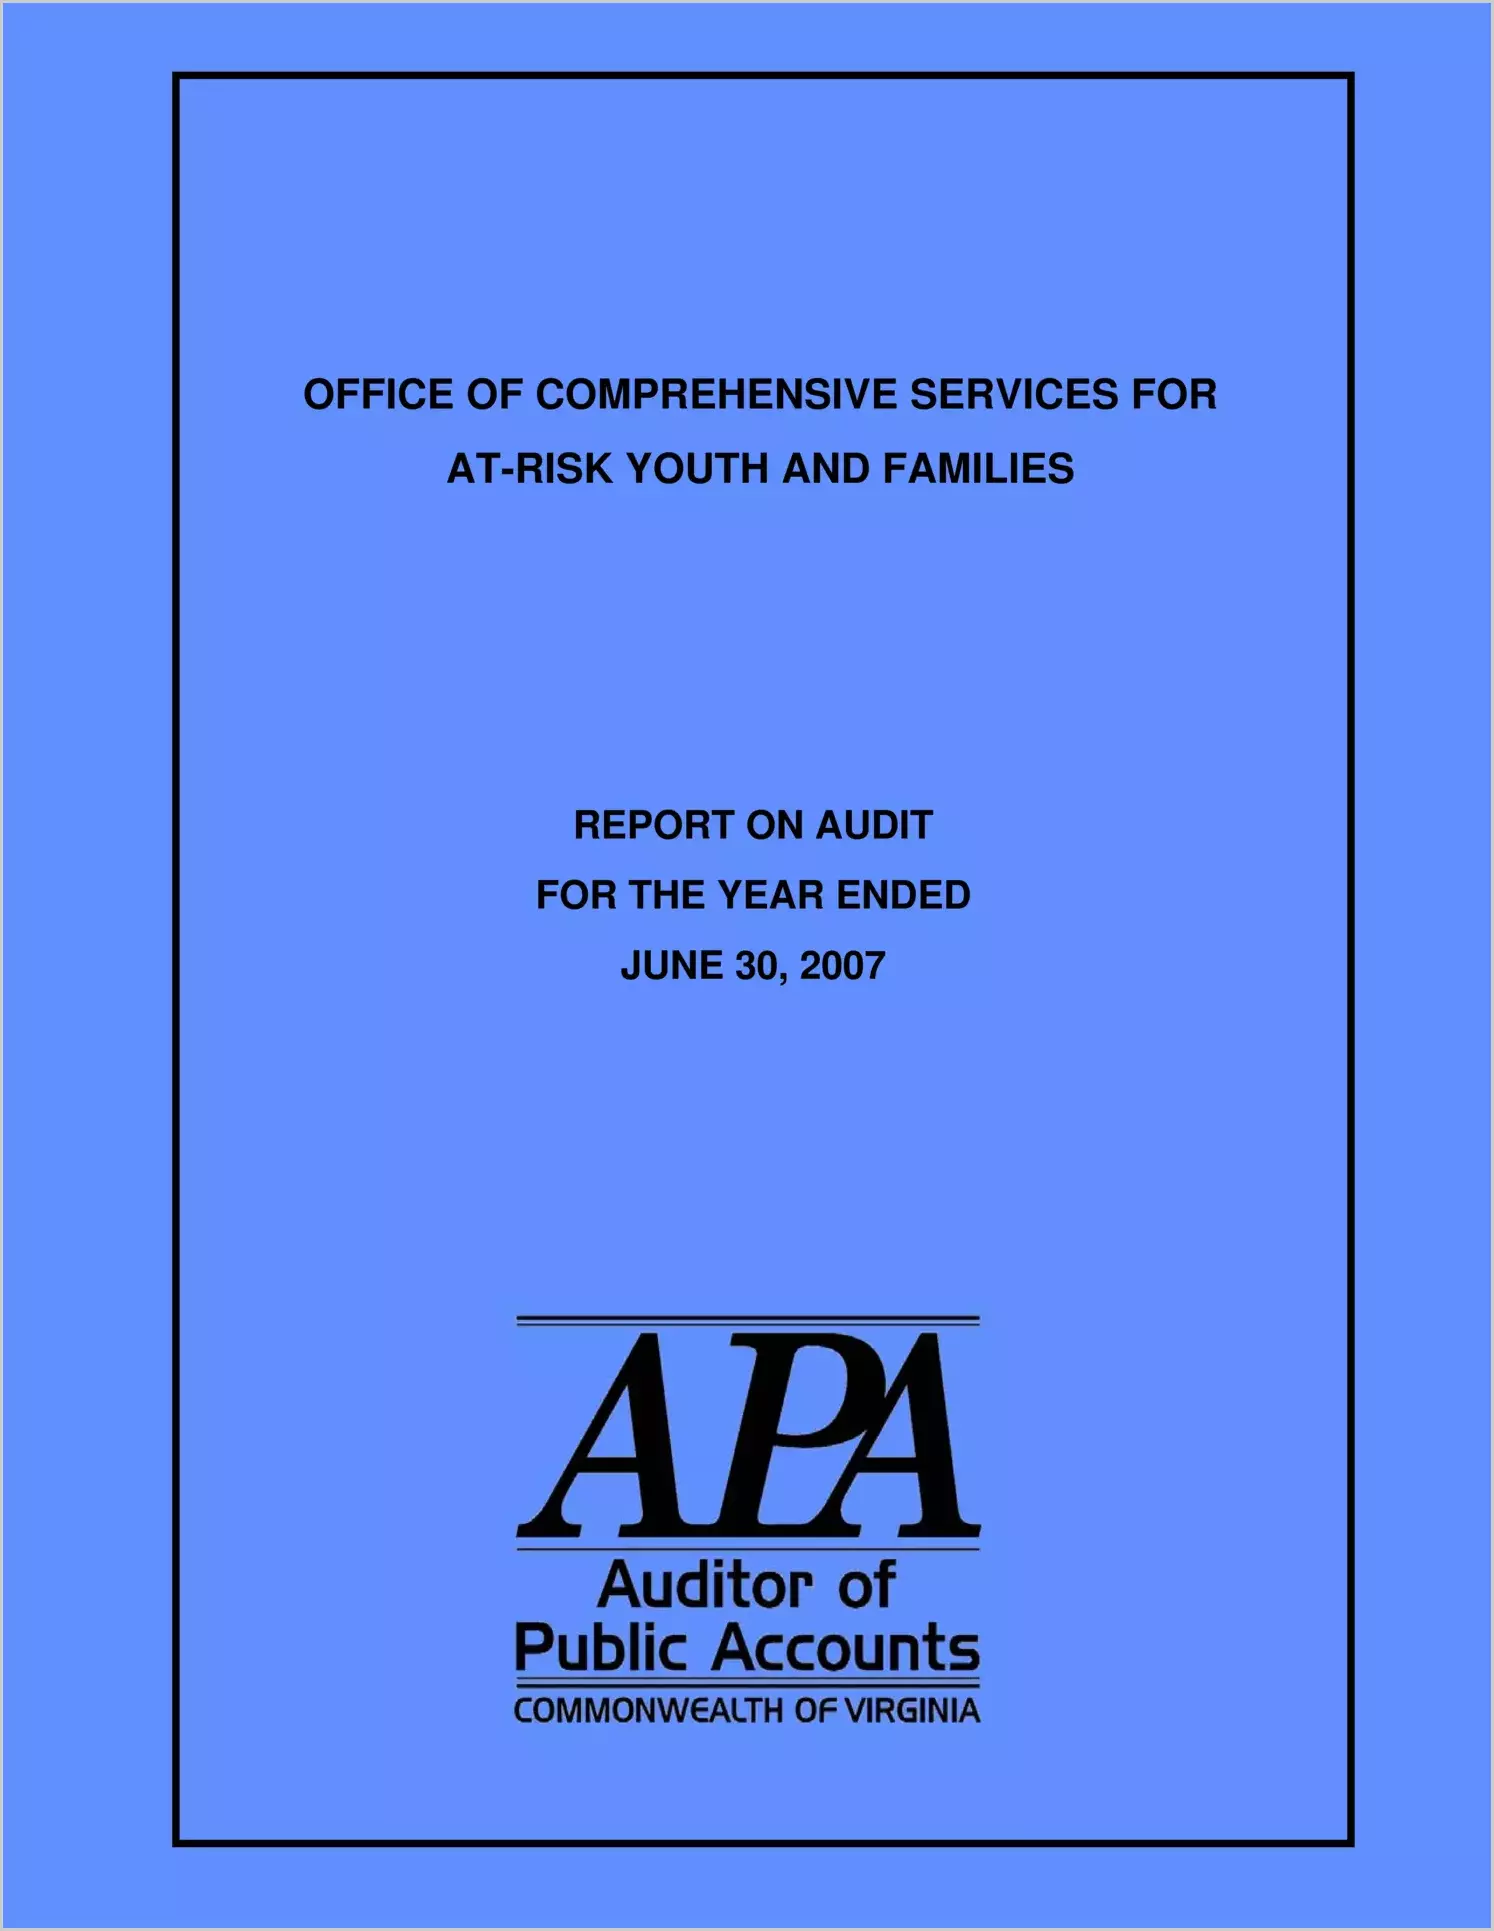 Office of Comprehensive Services for At-Risk Youth and Families for the year ended June 30, 2007